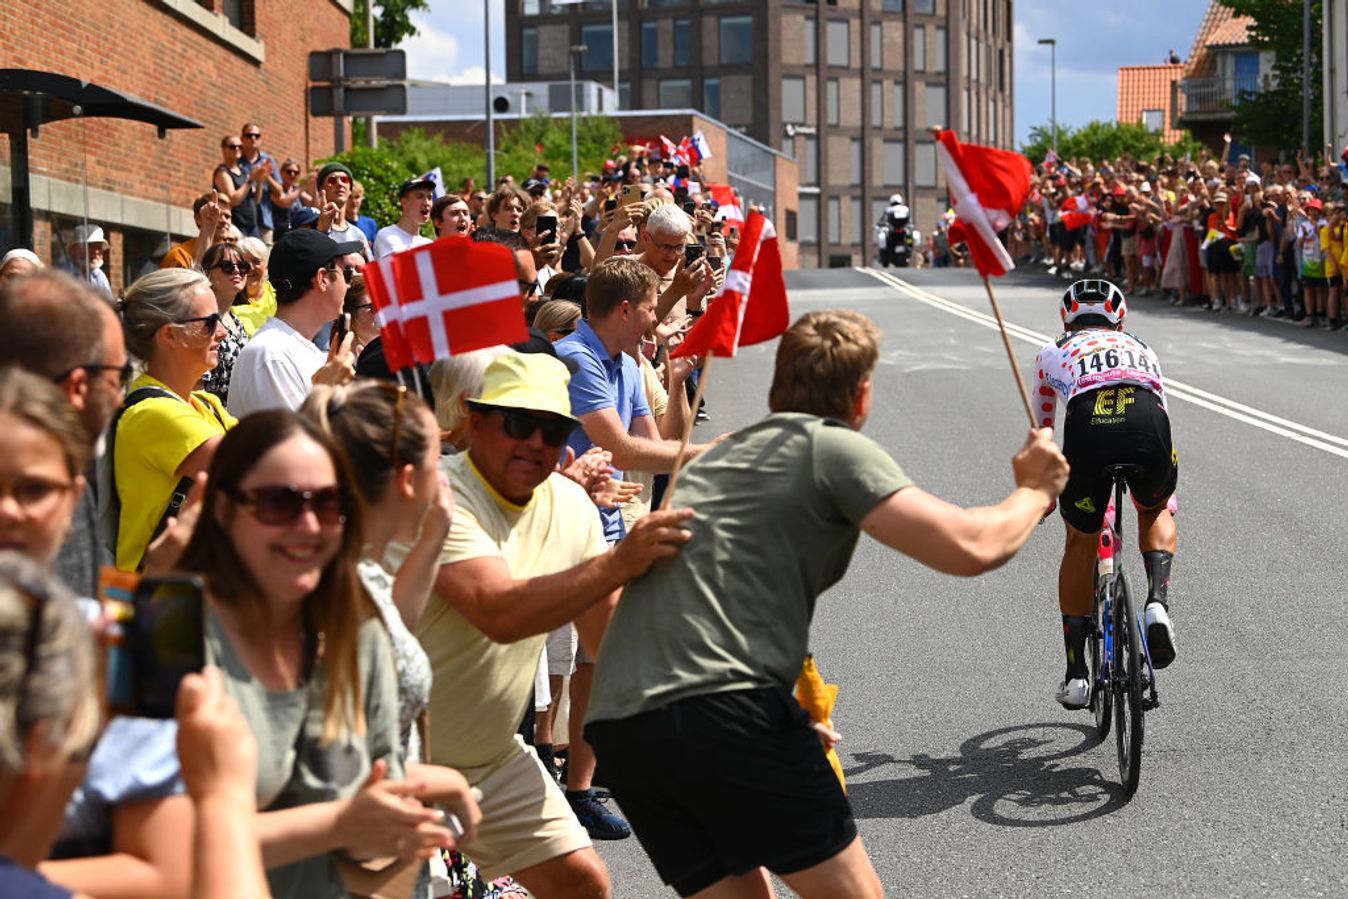 The Danish fans were out in force to cheer on Magnus Cort during the opening stages of the 2022 Tour de France, which started in Denmark